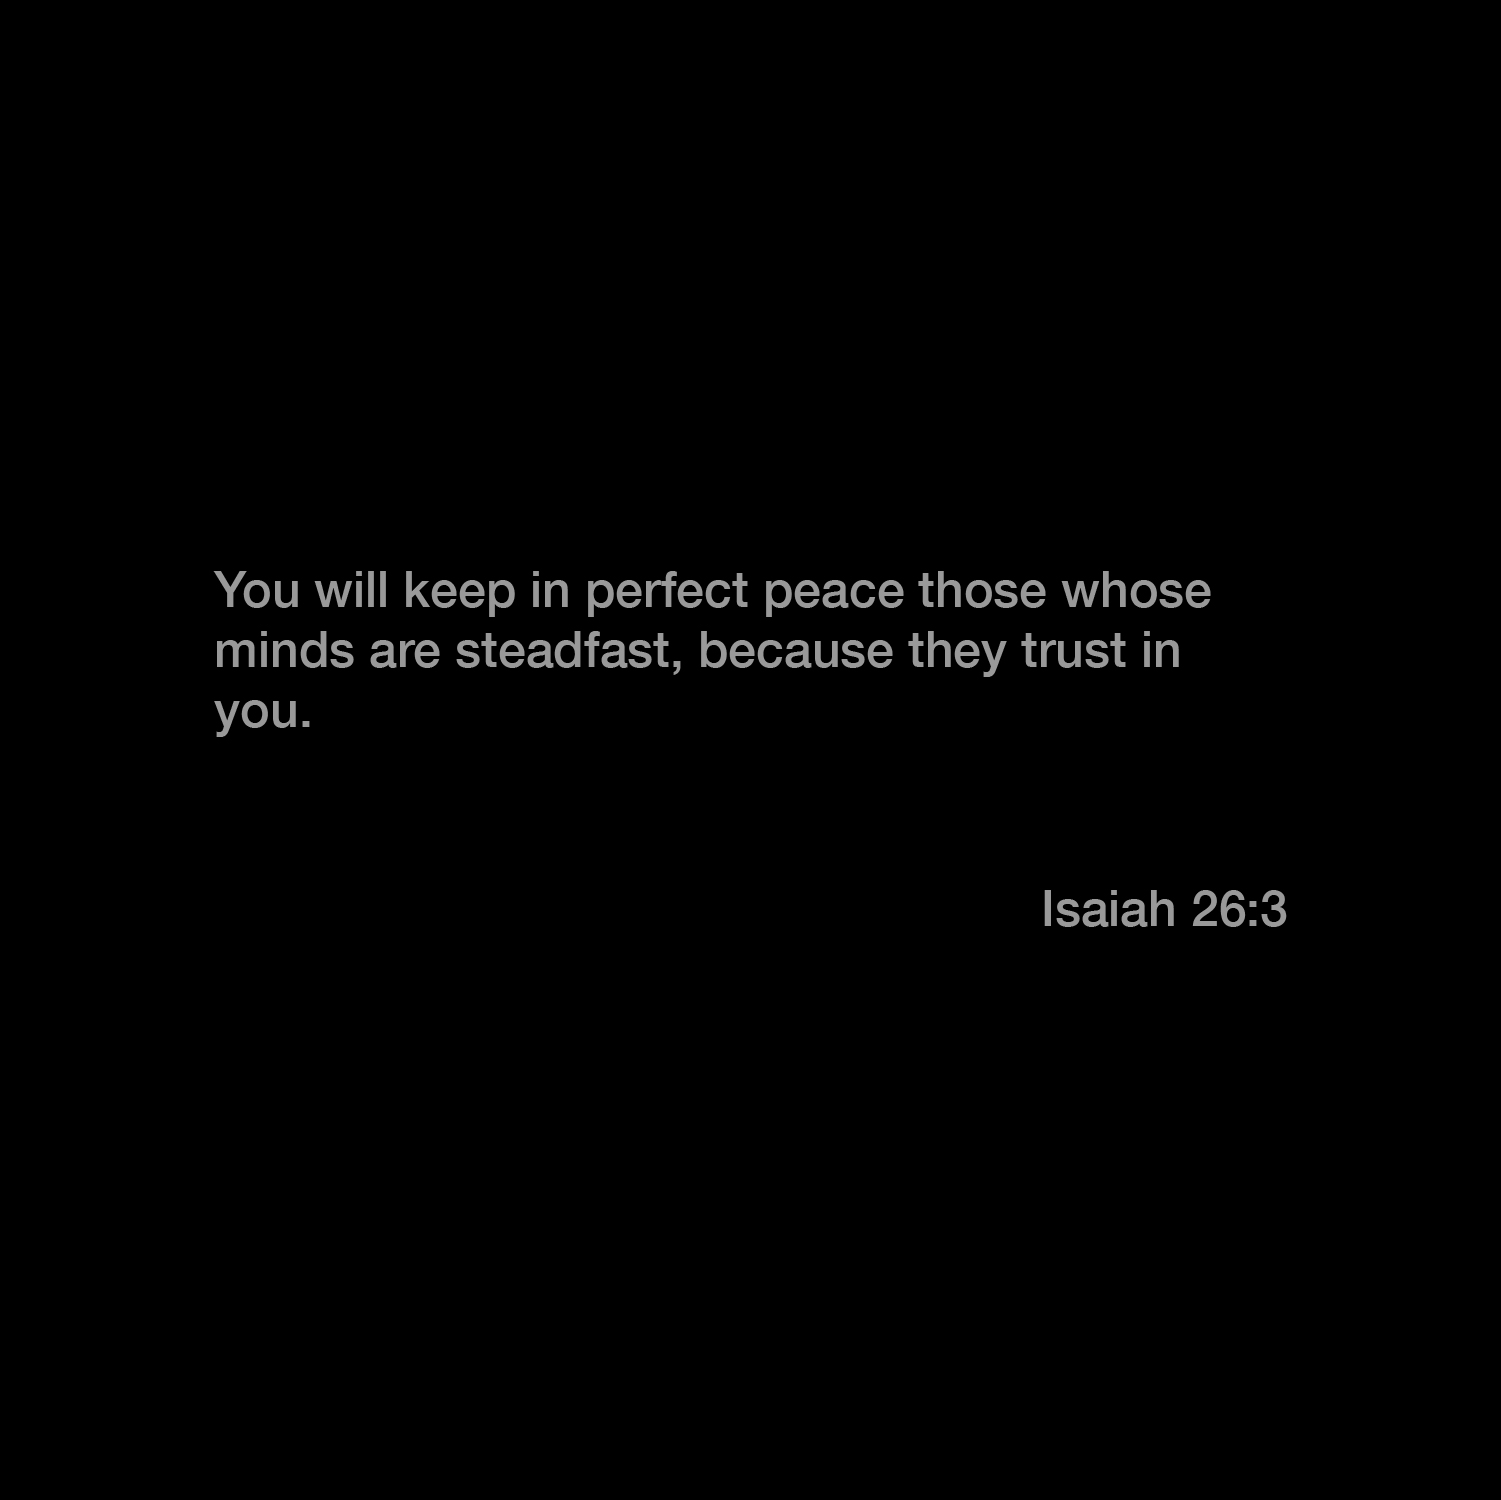 You will keep in perfect peace those whose minds are steadfast, because trust in Isaiah 26.3 they you.